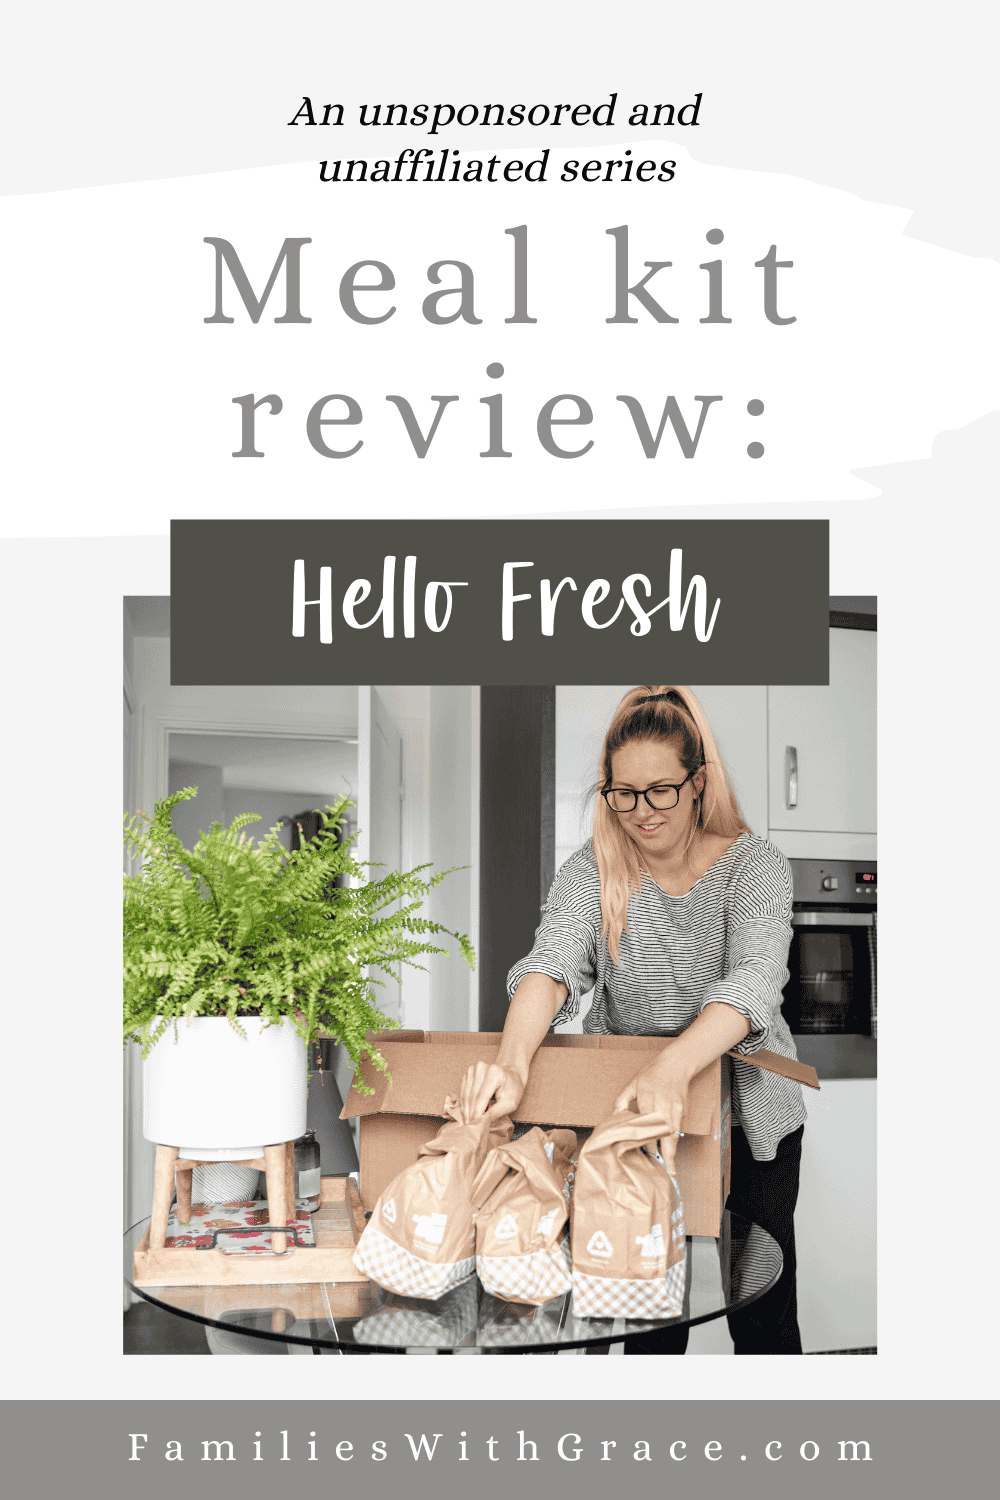 Meal kit review: Hello Fresh